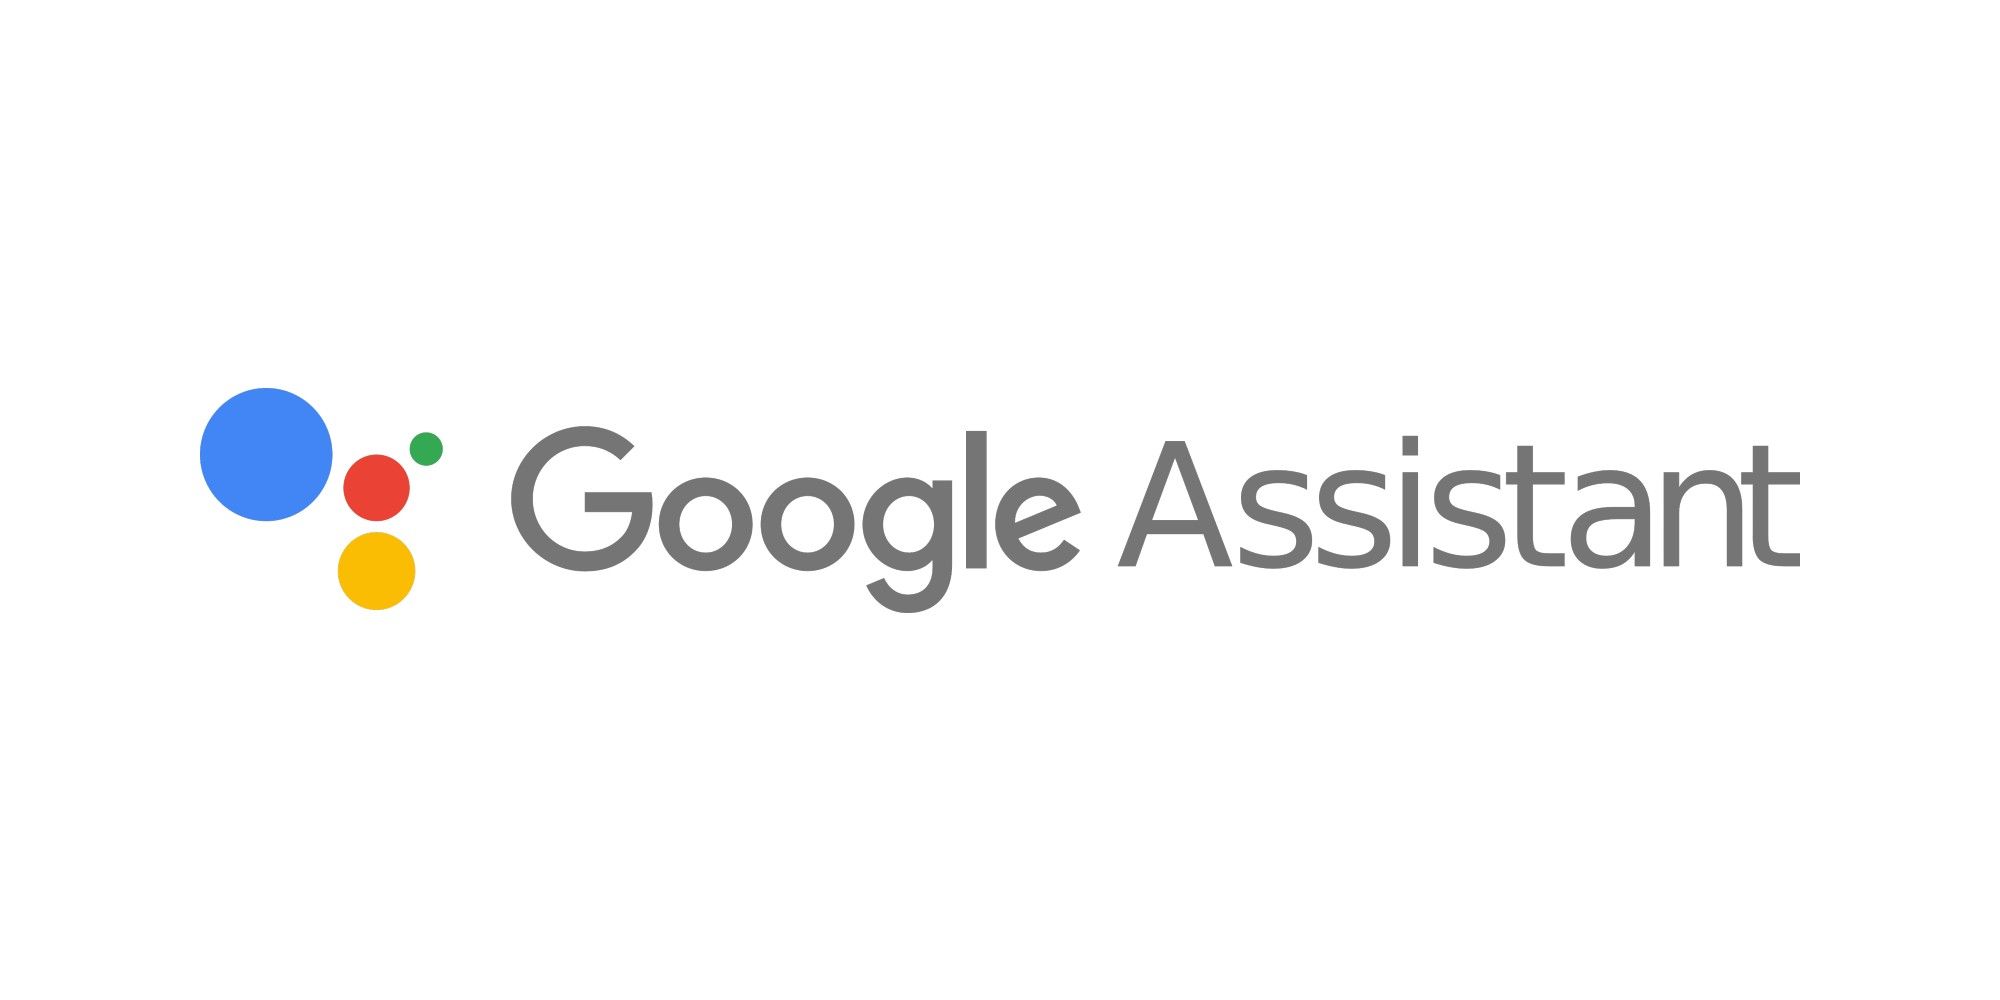 Chromebooks come with Google Assistant